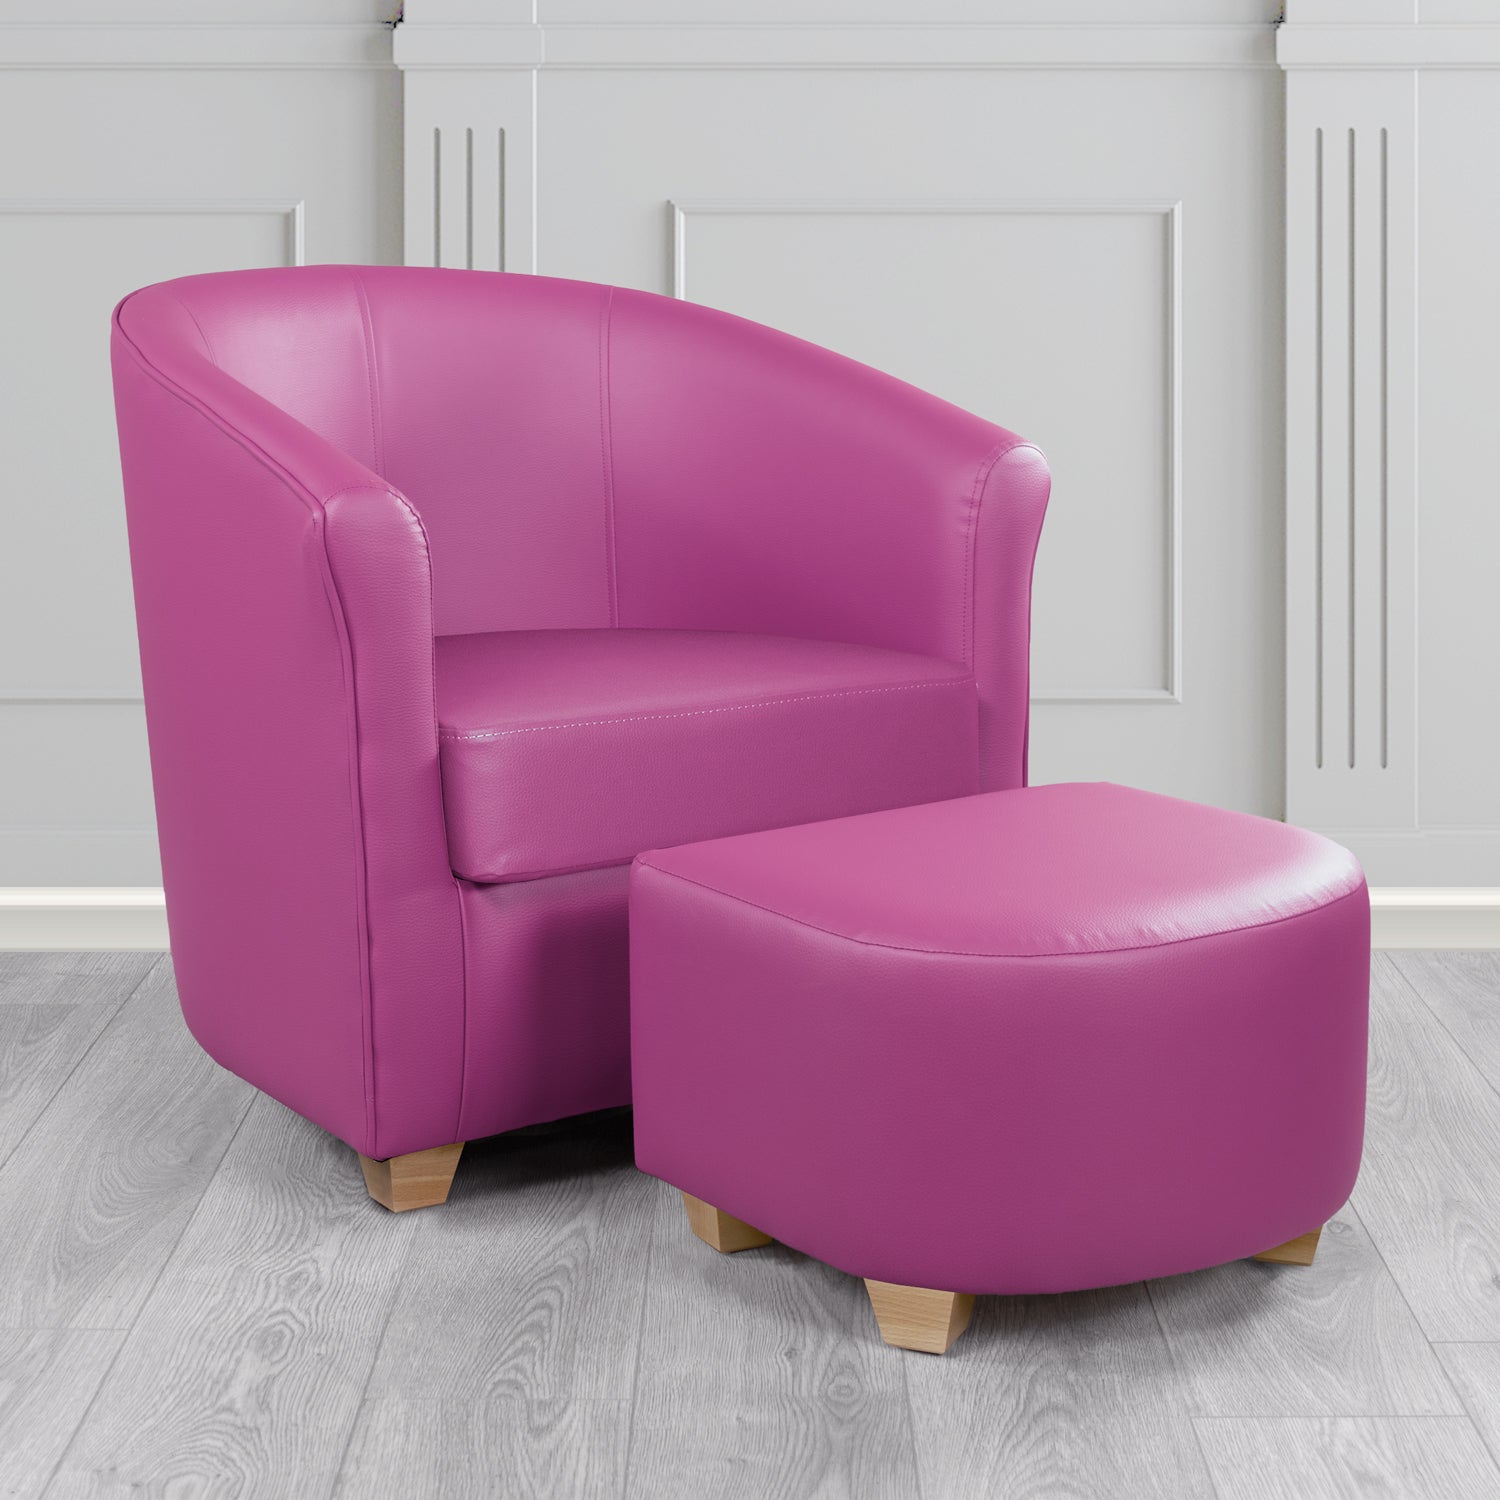 Cannes Tub Chair with Footstool Set in Just Colour Fuchsia Crib 5 Faux Leather - The Tub Chair Shop